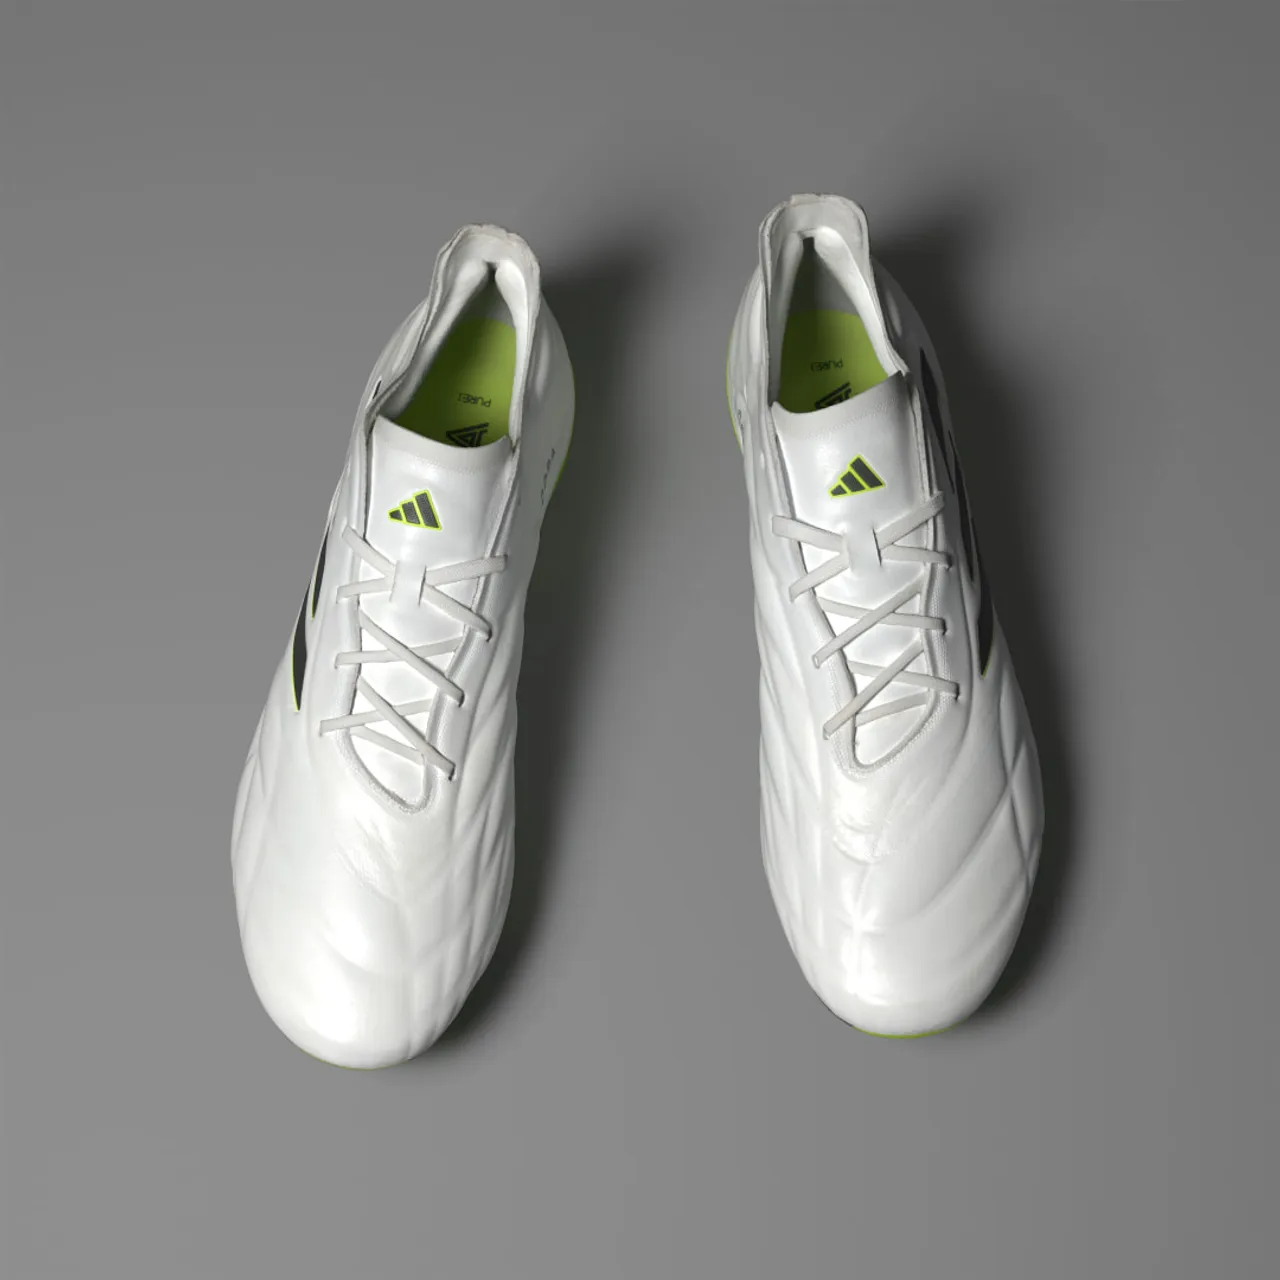 Copa Pure II.1 Firm Ground Boots